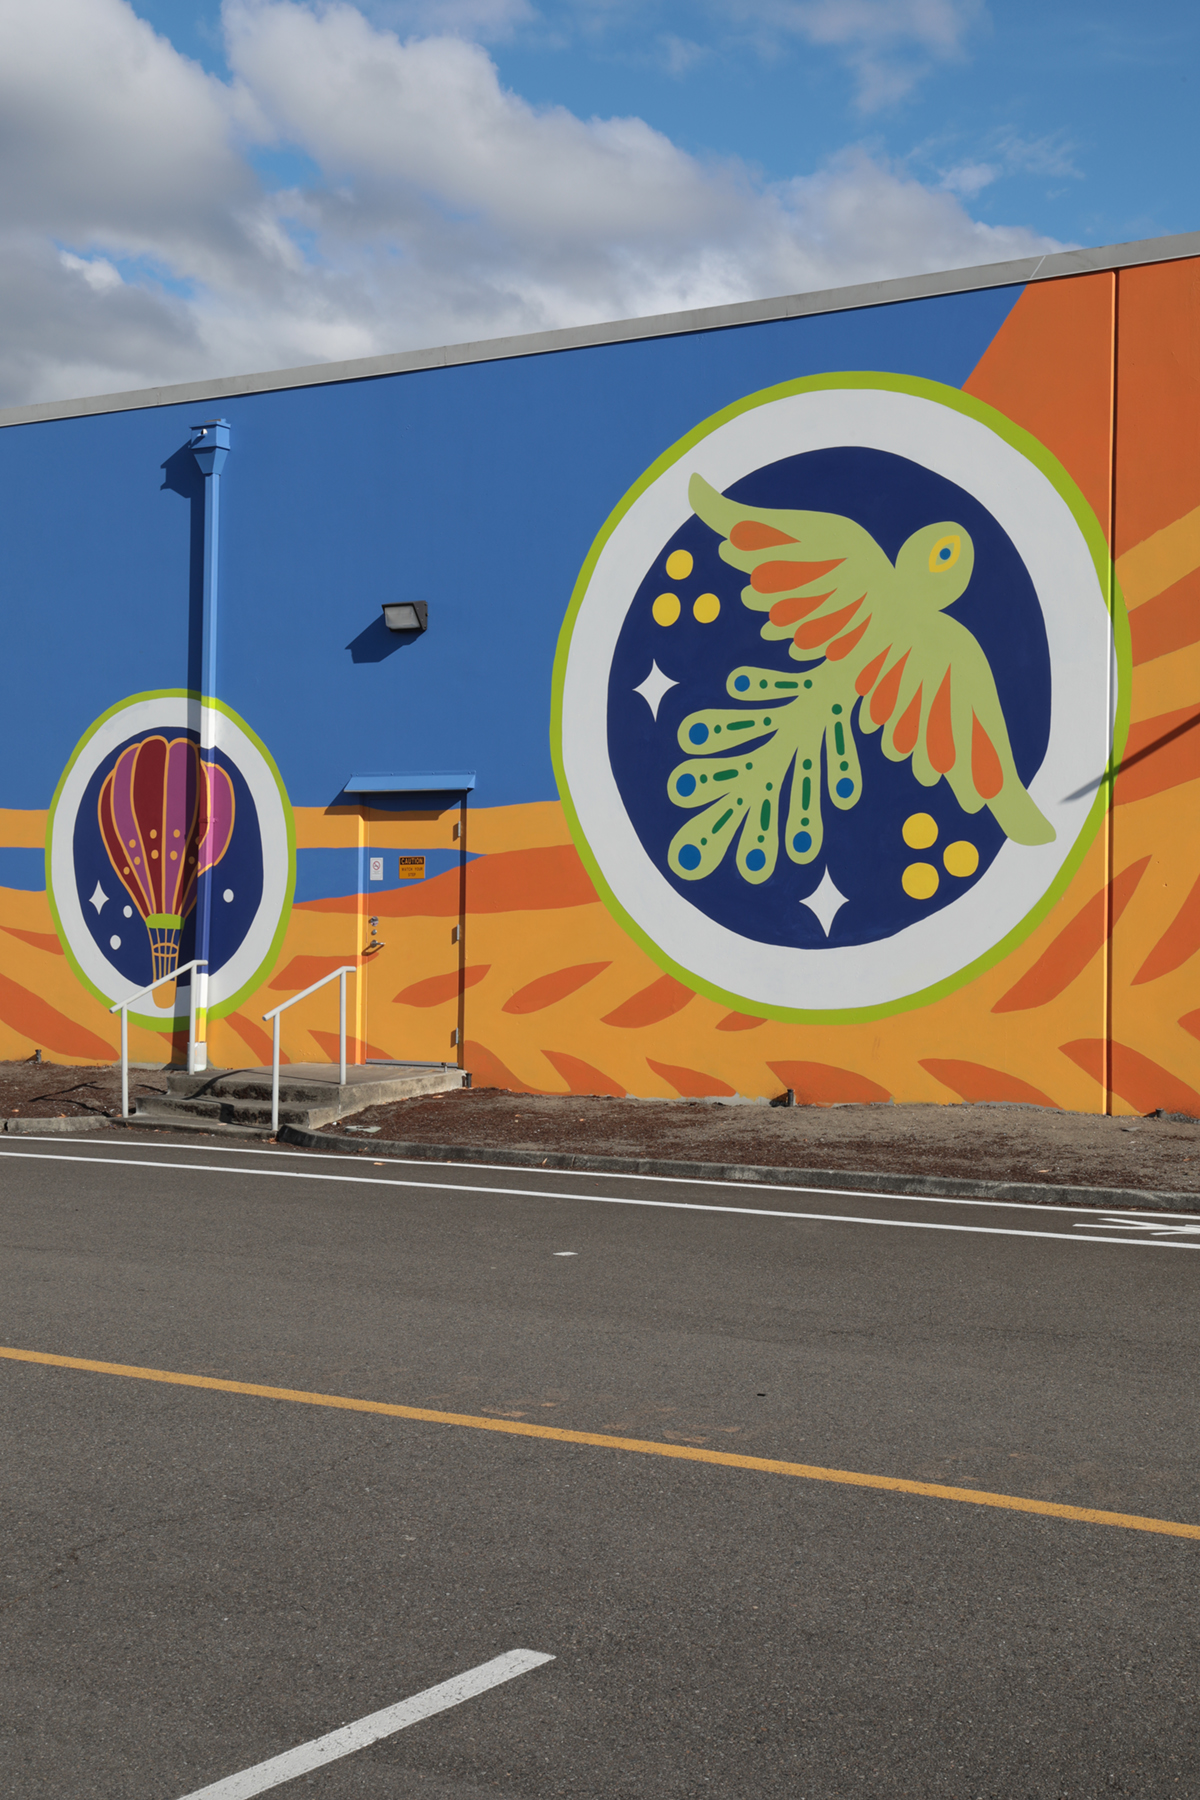 Detailed view of a wall mural featuring a hot air balloon and large stylized bird.